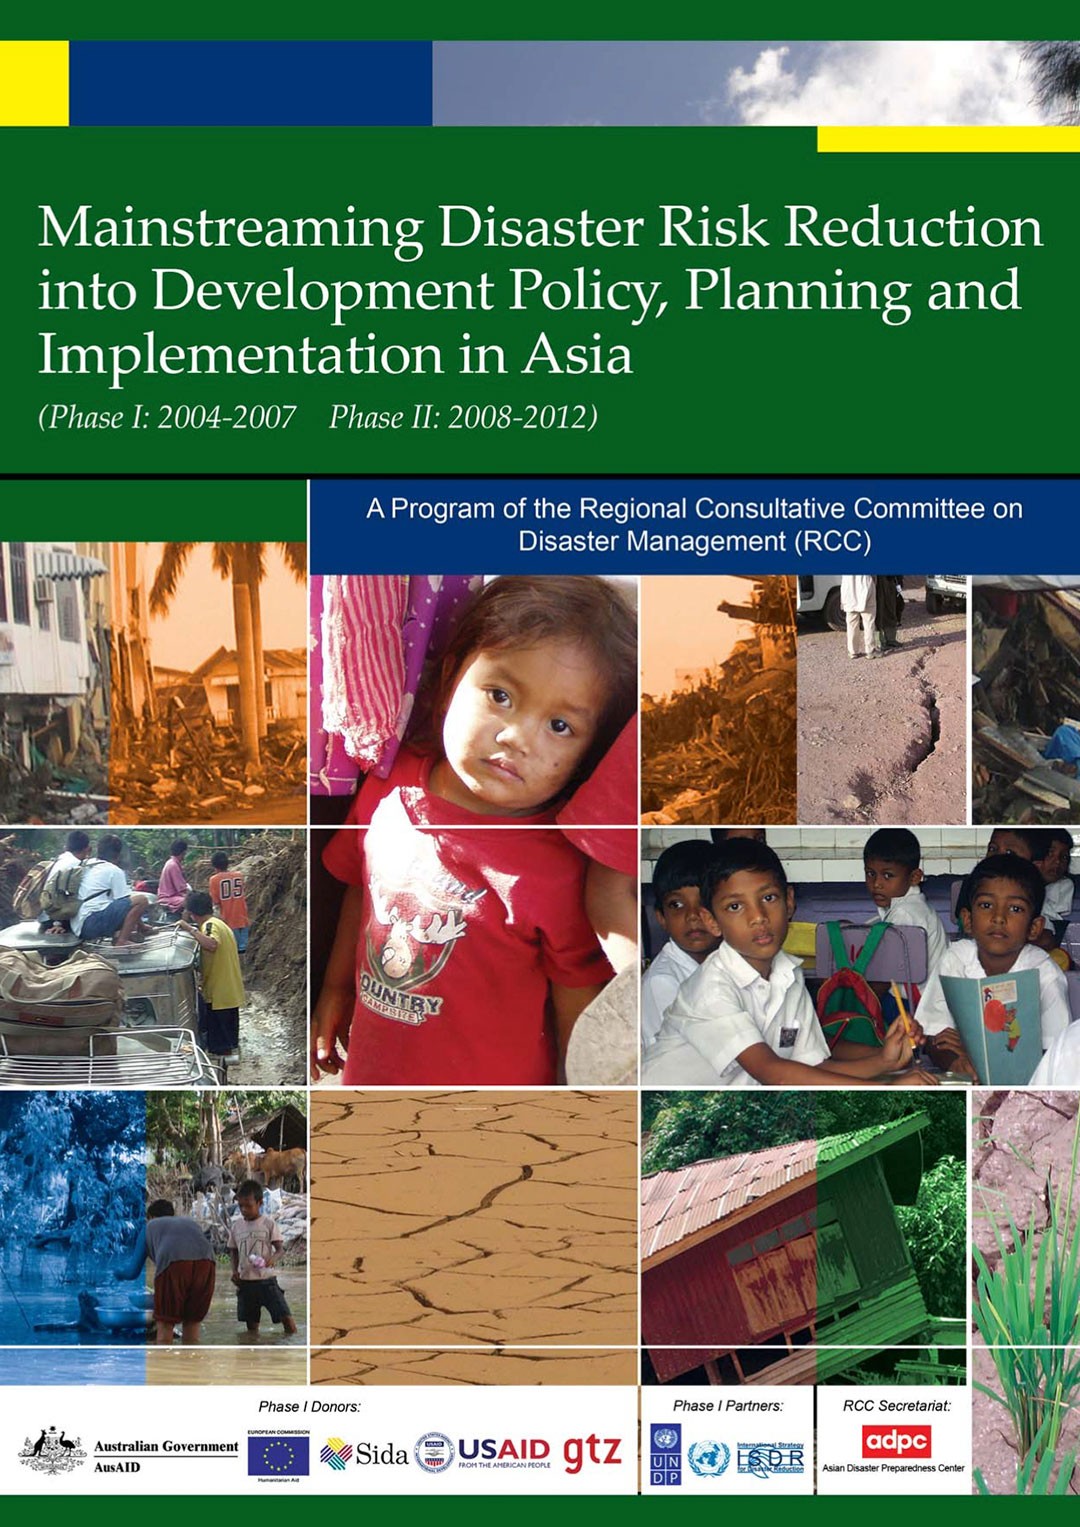 Mainstreaming DRR into Development Policy, Planning and Implementation in Asia (Phase I and II)